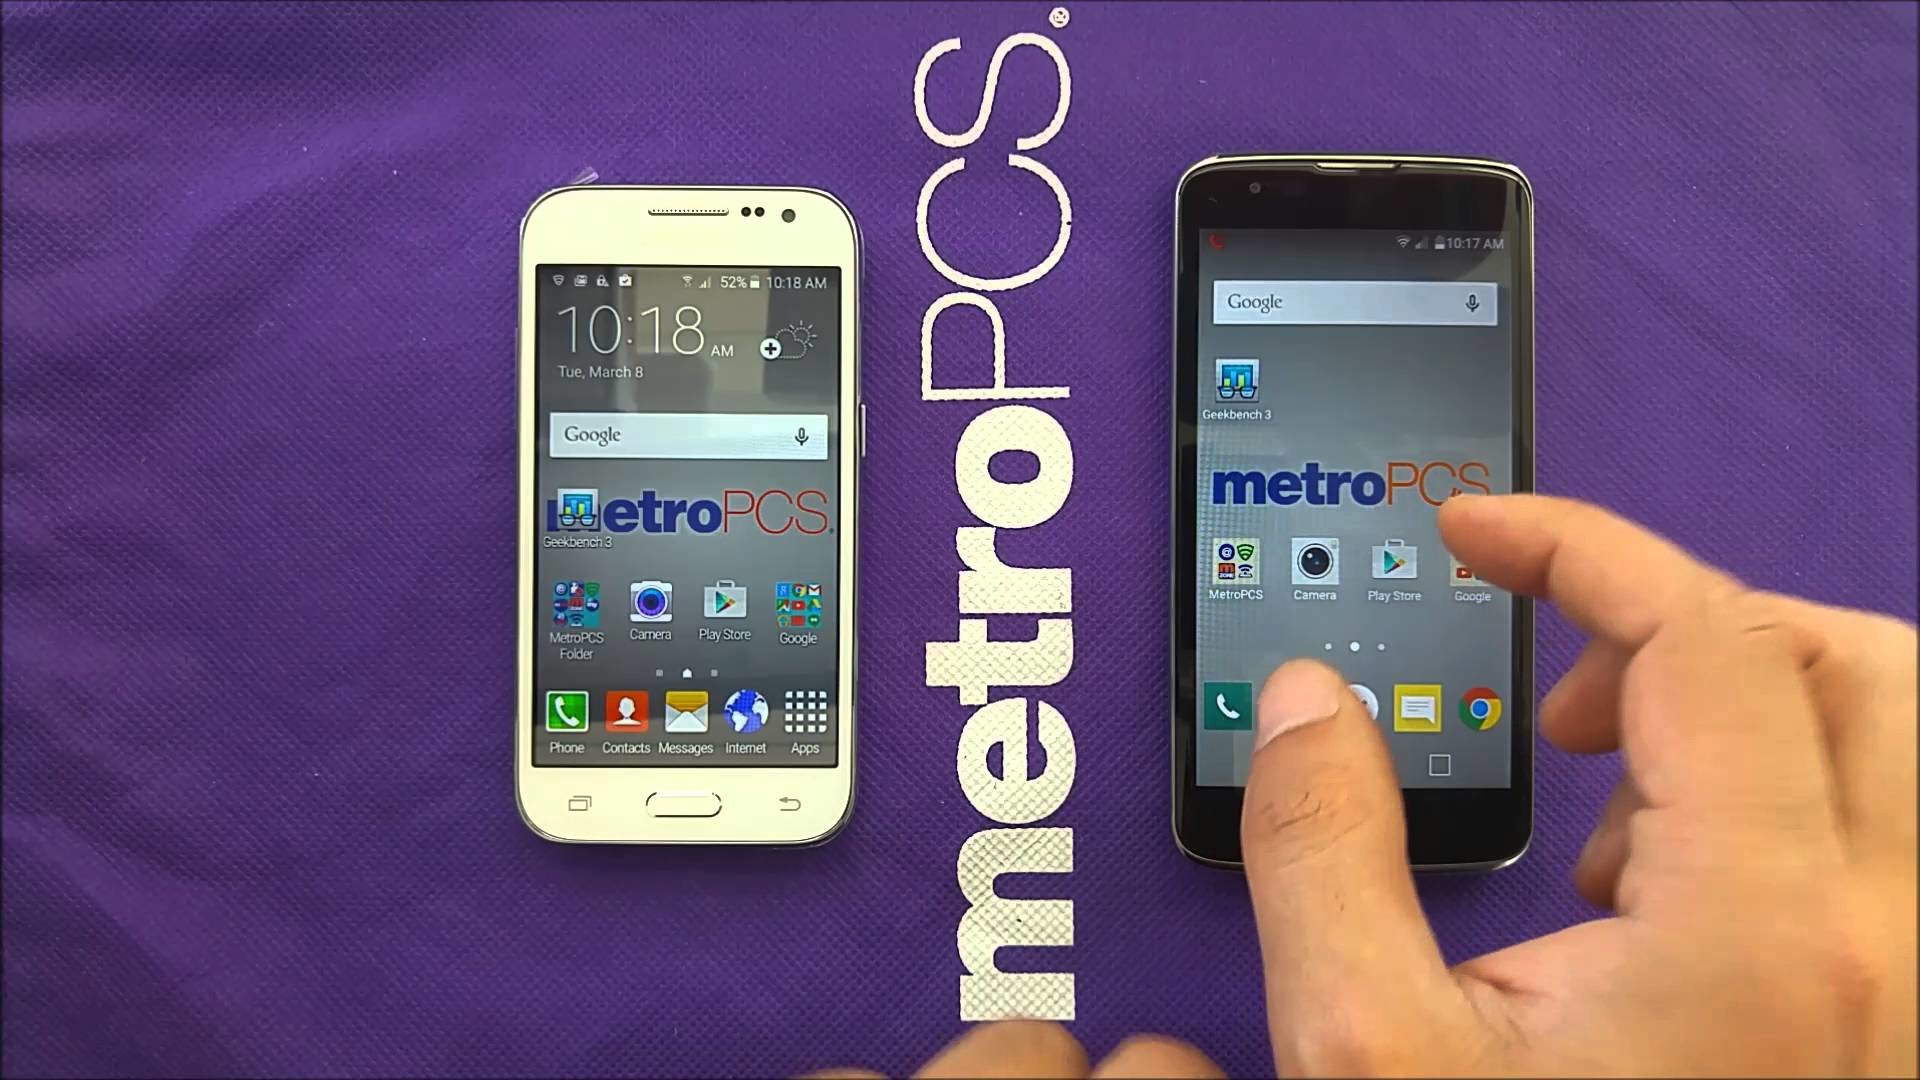 Comparison LG K7 With Samsung Galaxy core Prime For Metro PcsT mobile – YouTube